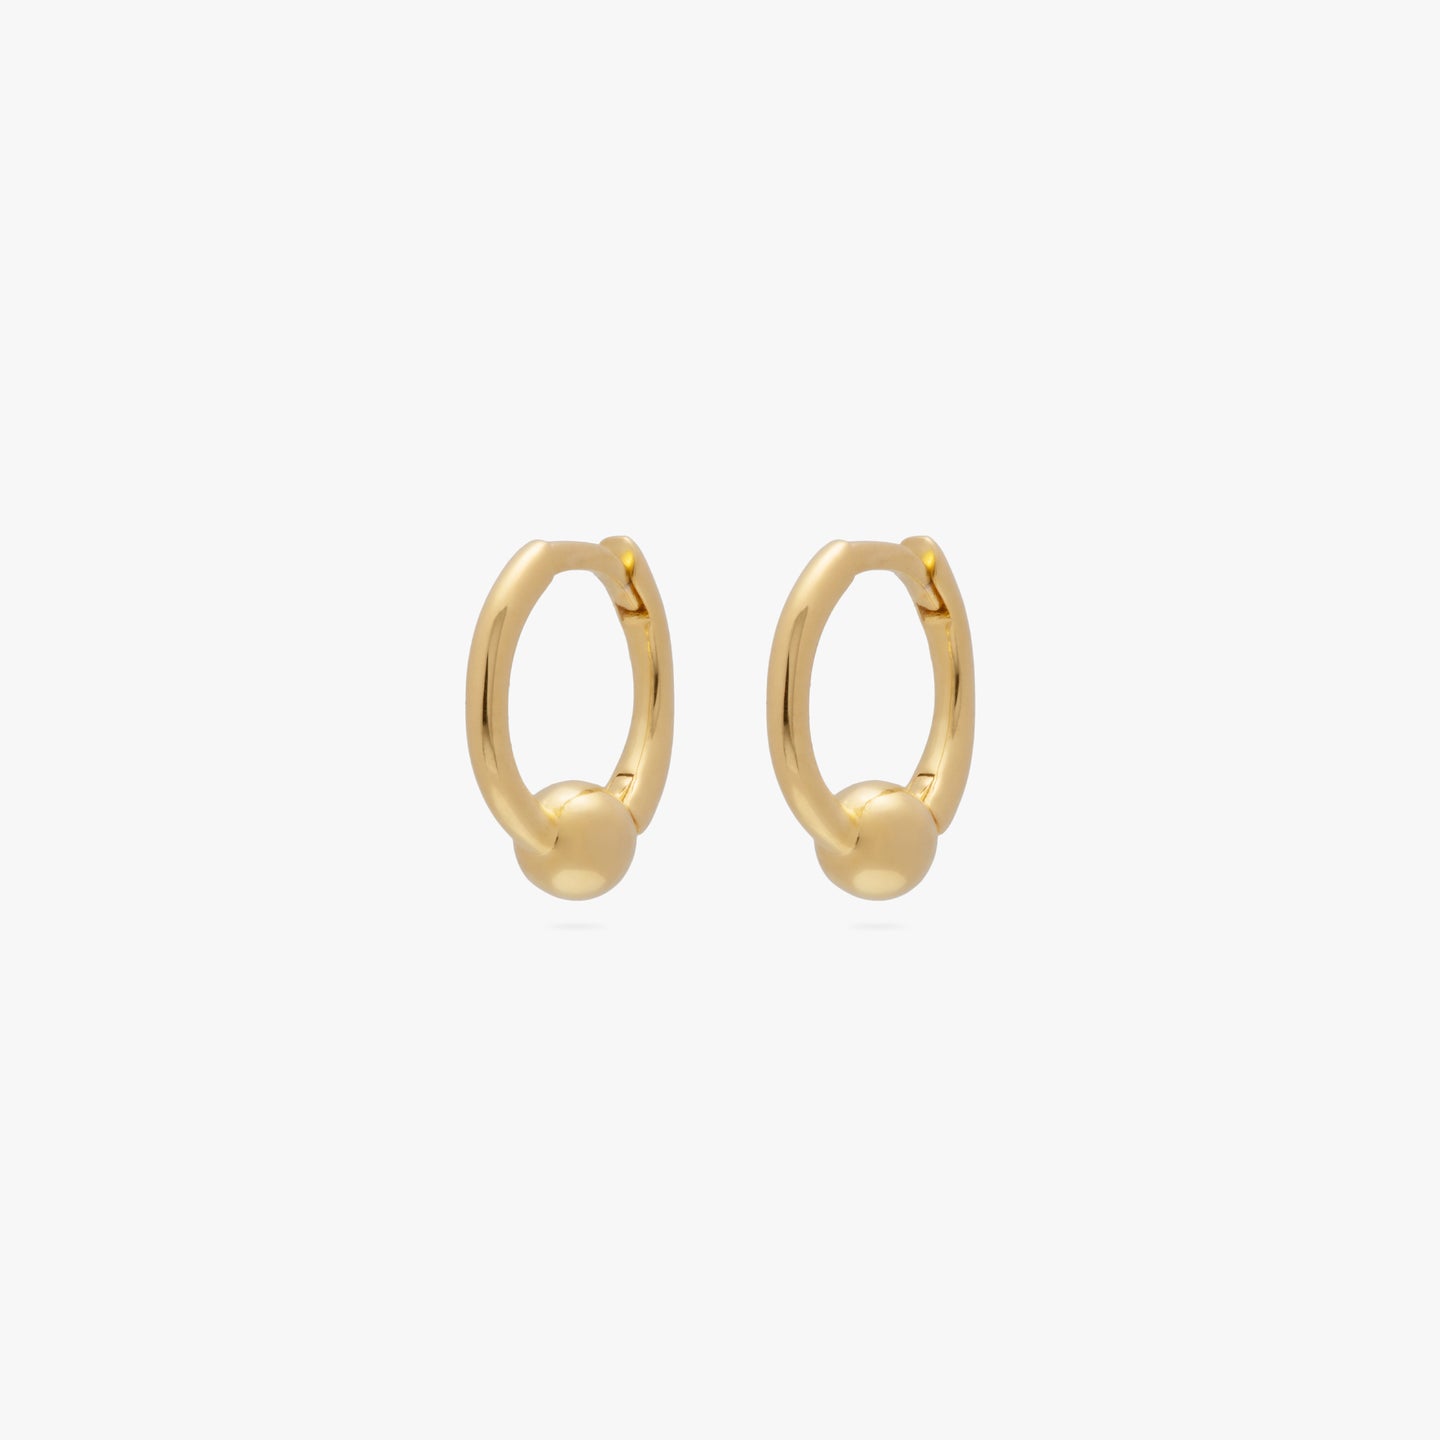 A pair of mini gold huggies with a small gold ball [pair] color:null|gold